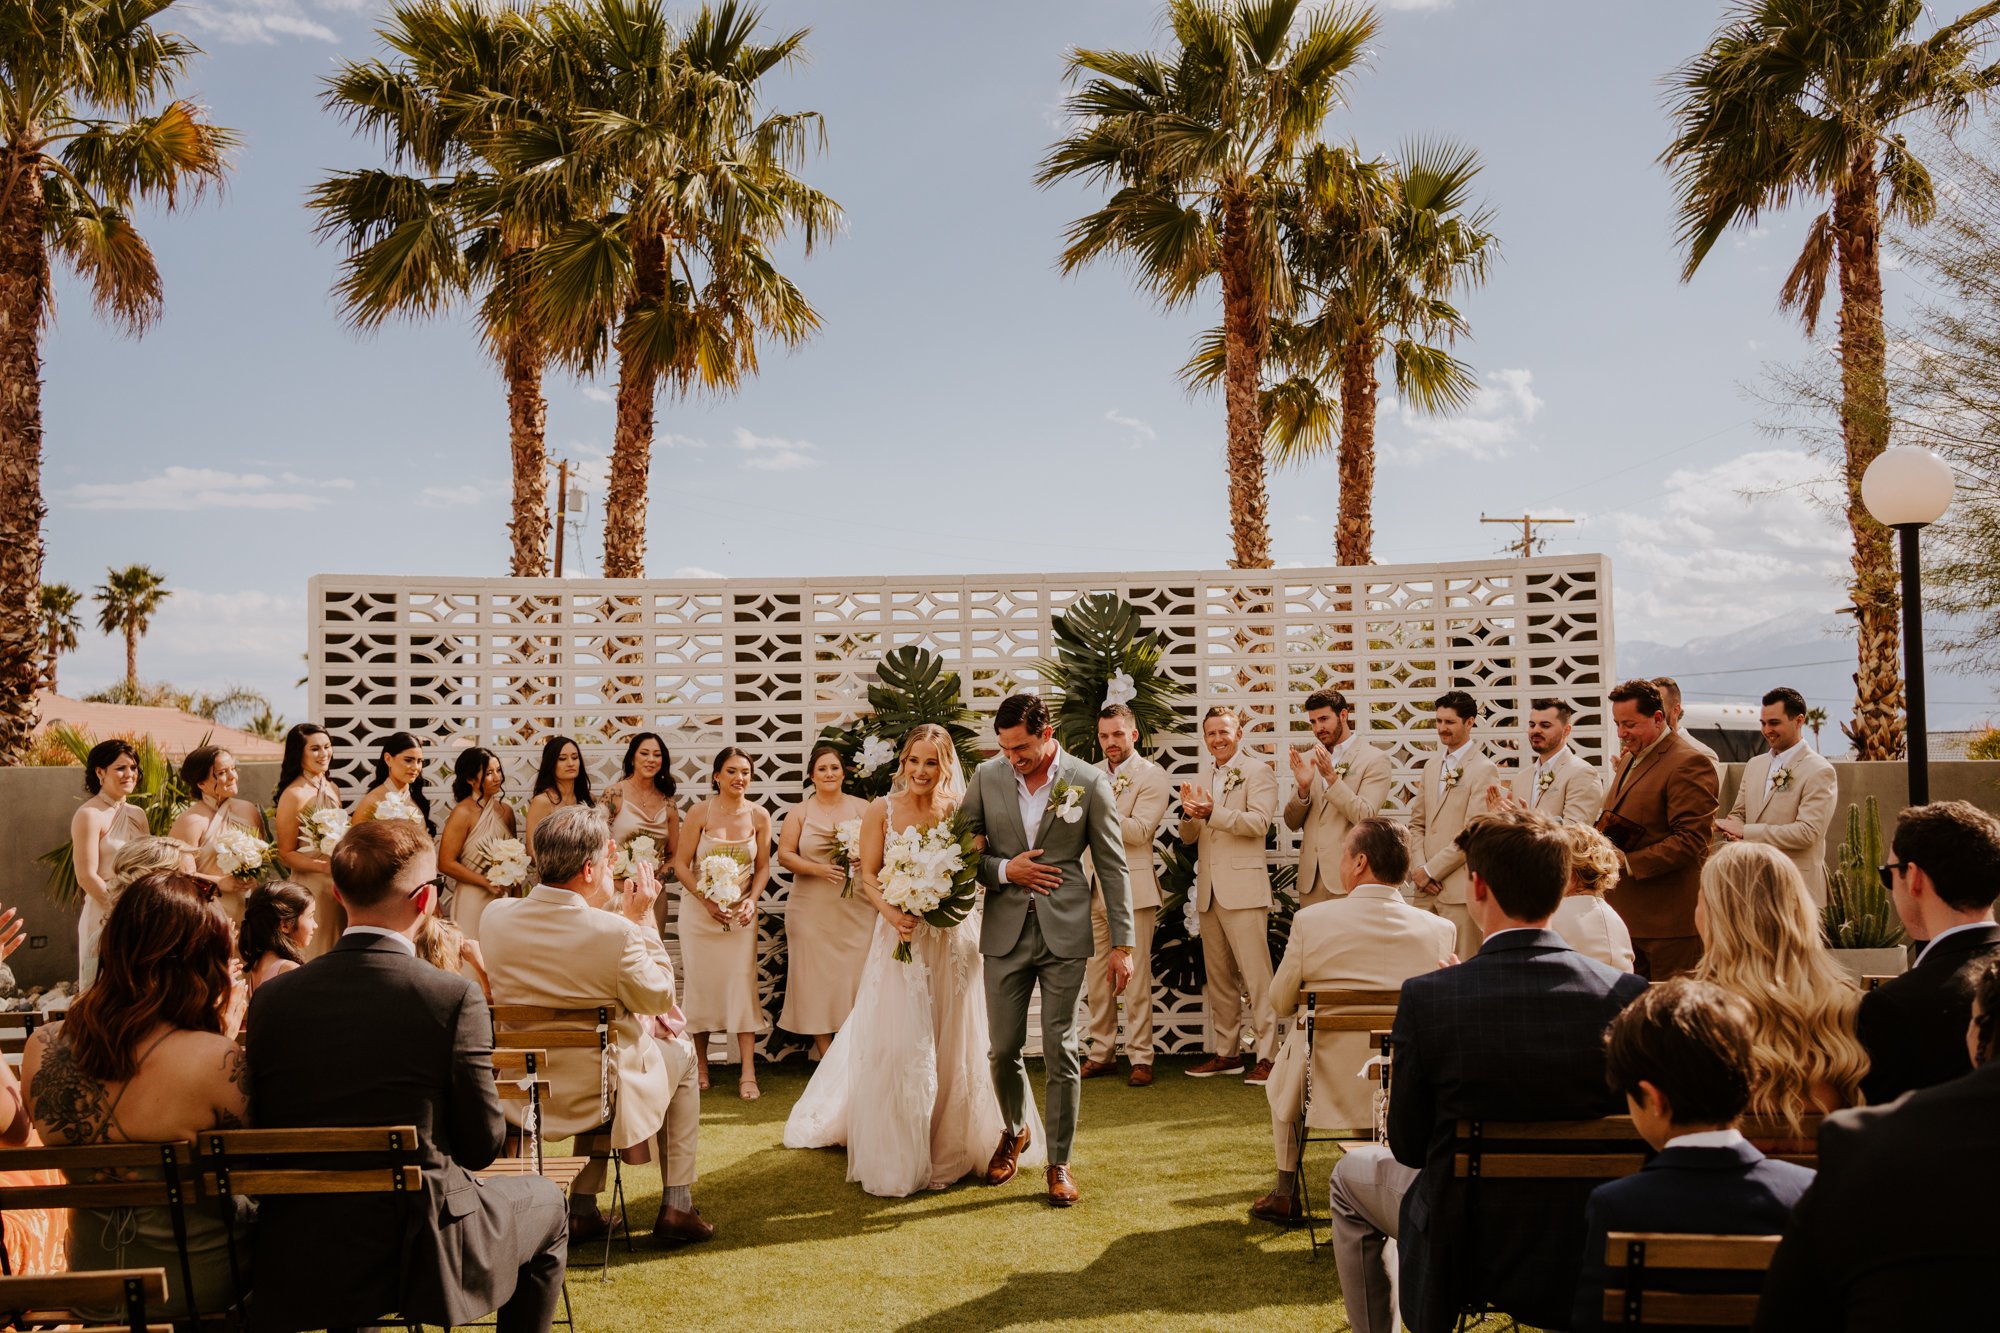 The Lautner Compound Palm Springs Wedding ceremony | Tida Svy Photography | www.tidasvy.com